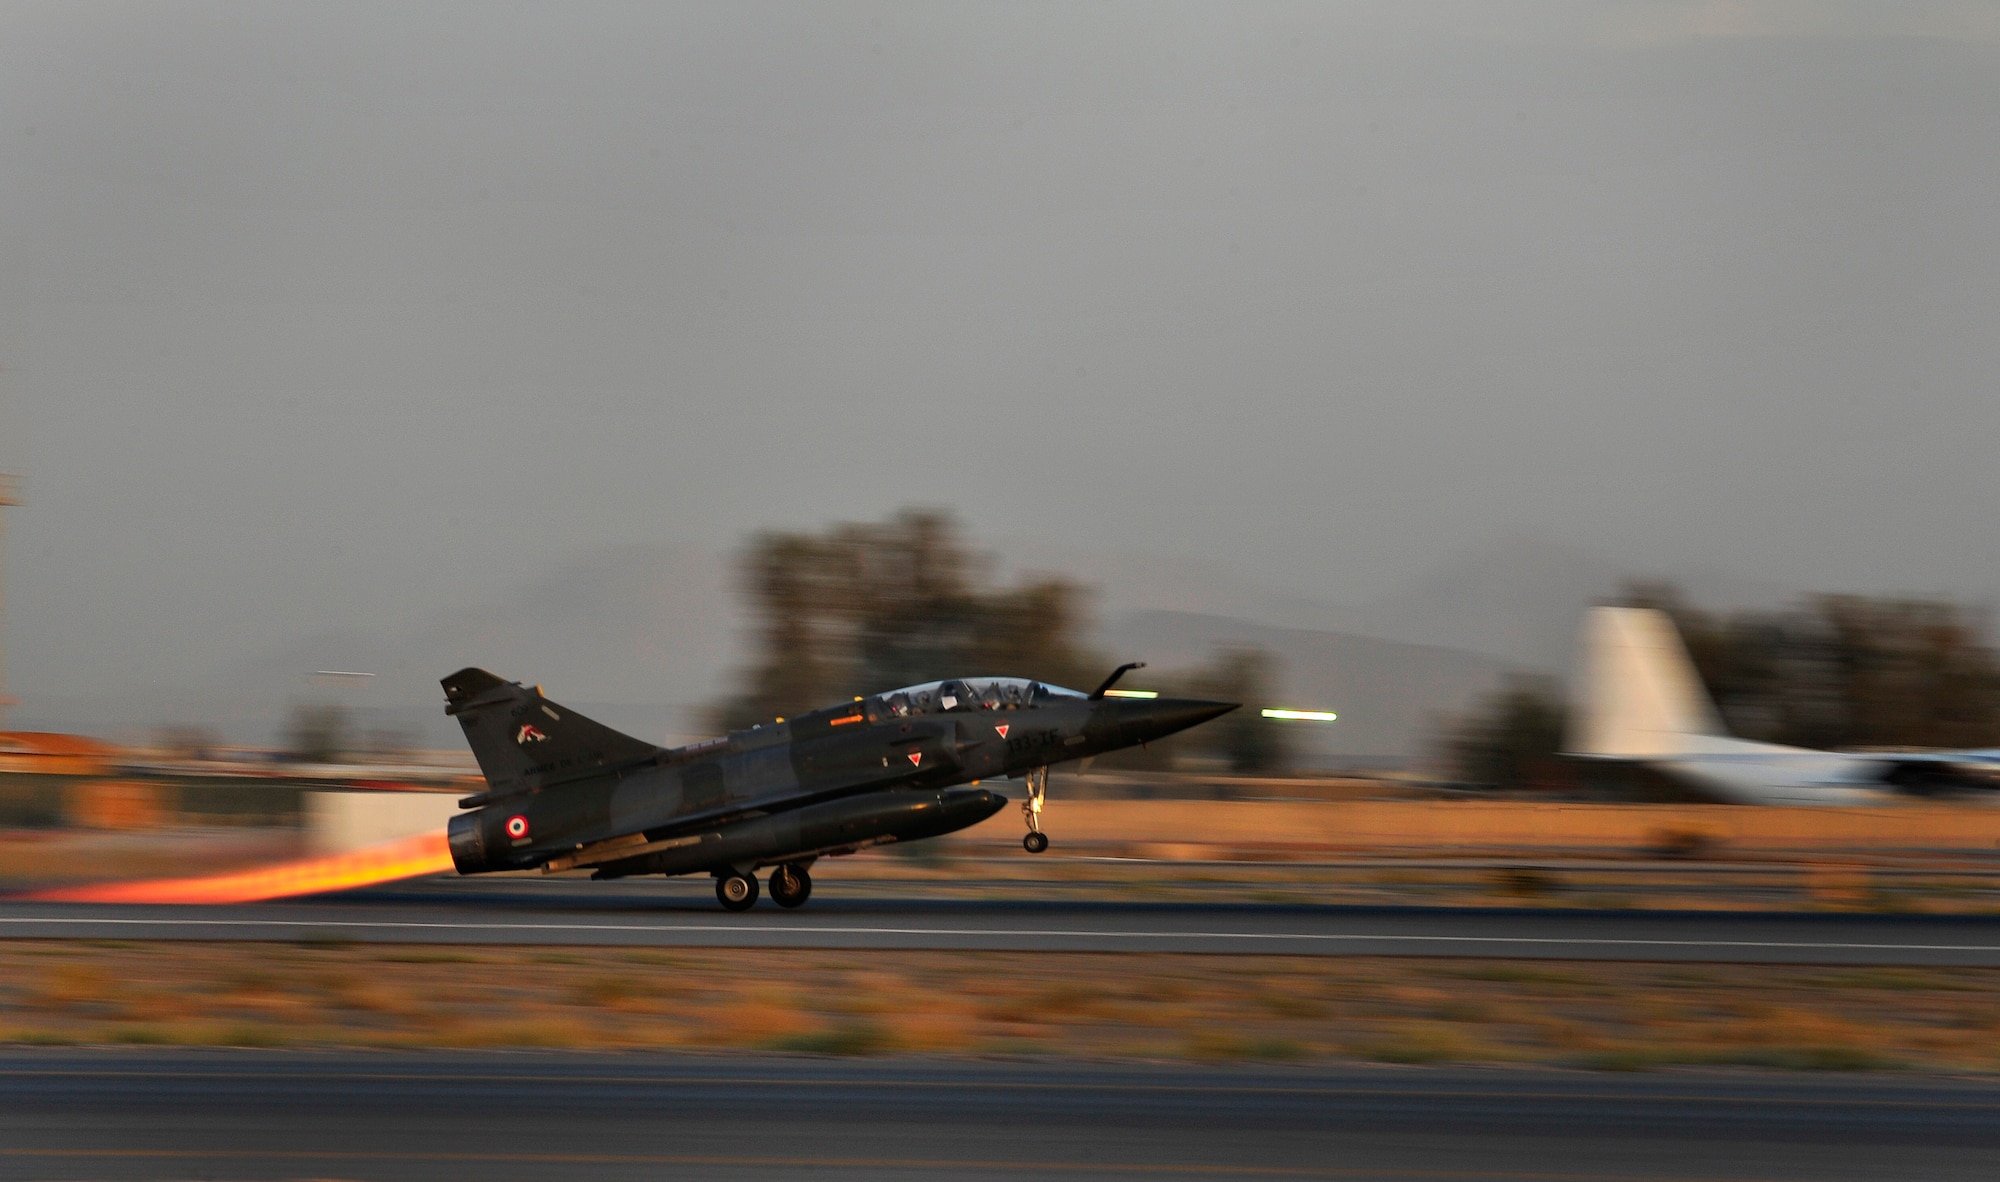 Members of the French Air Force, Detachment 3/3, in the Mirage 2000-D takeoff during a combat mission at Kandahar Airfield, Afghanistan, June 18, 2012. Approximately 3,000 French troops are currently deployed in support of OEF and ISAF. Of that, approximately 300 FAF Airmen are stationed in Afghanistan, Tajikistan and Southwest Asia.(U.S. Air Force photo/Staff Sgt. Clay Lancaster)
